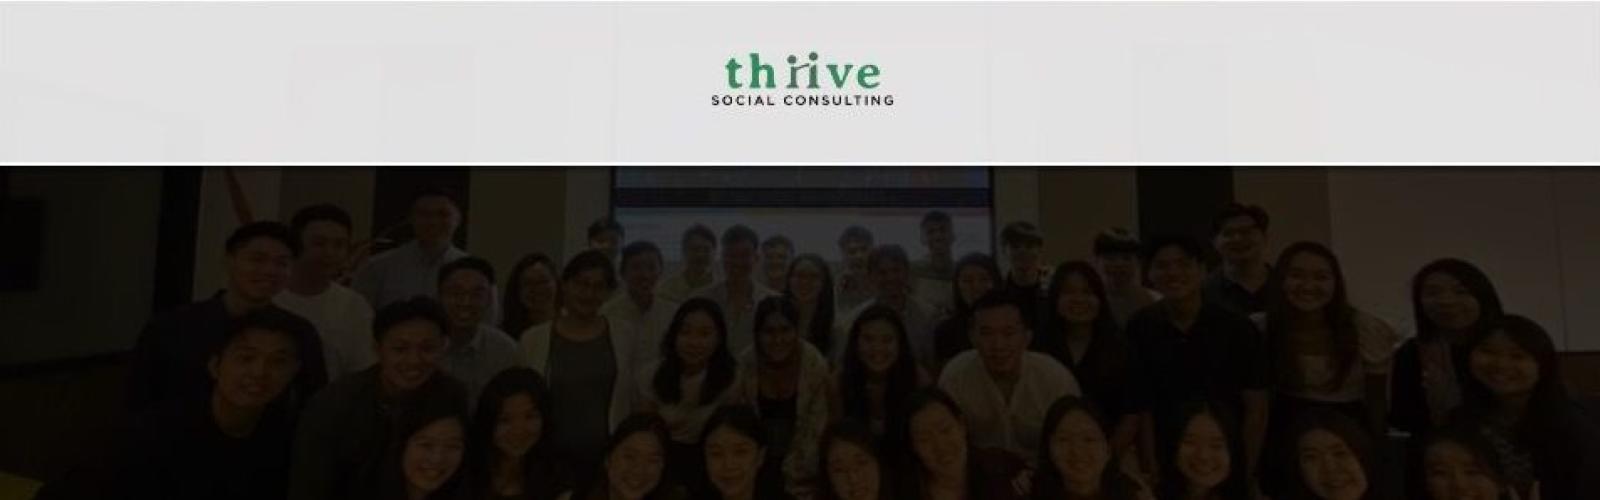 SMU Thrive Consulting Banner